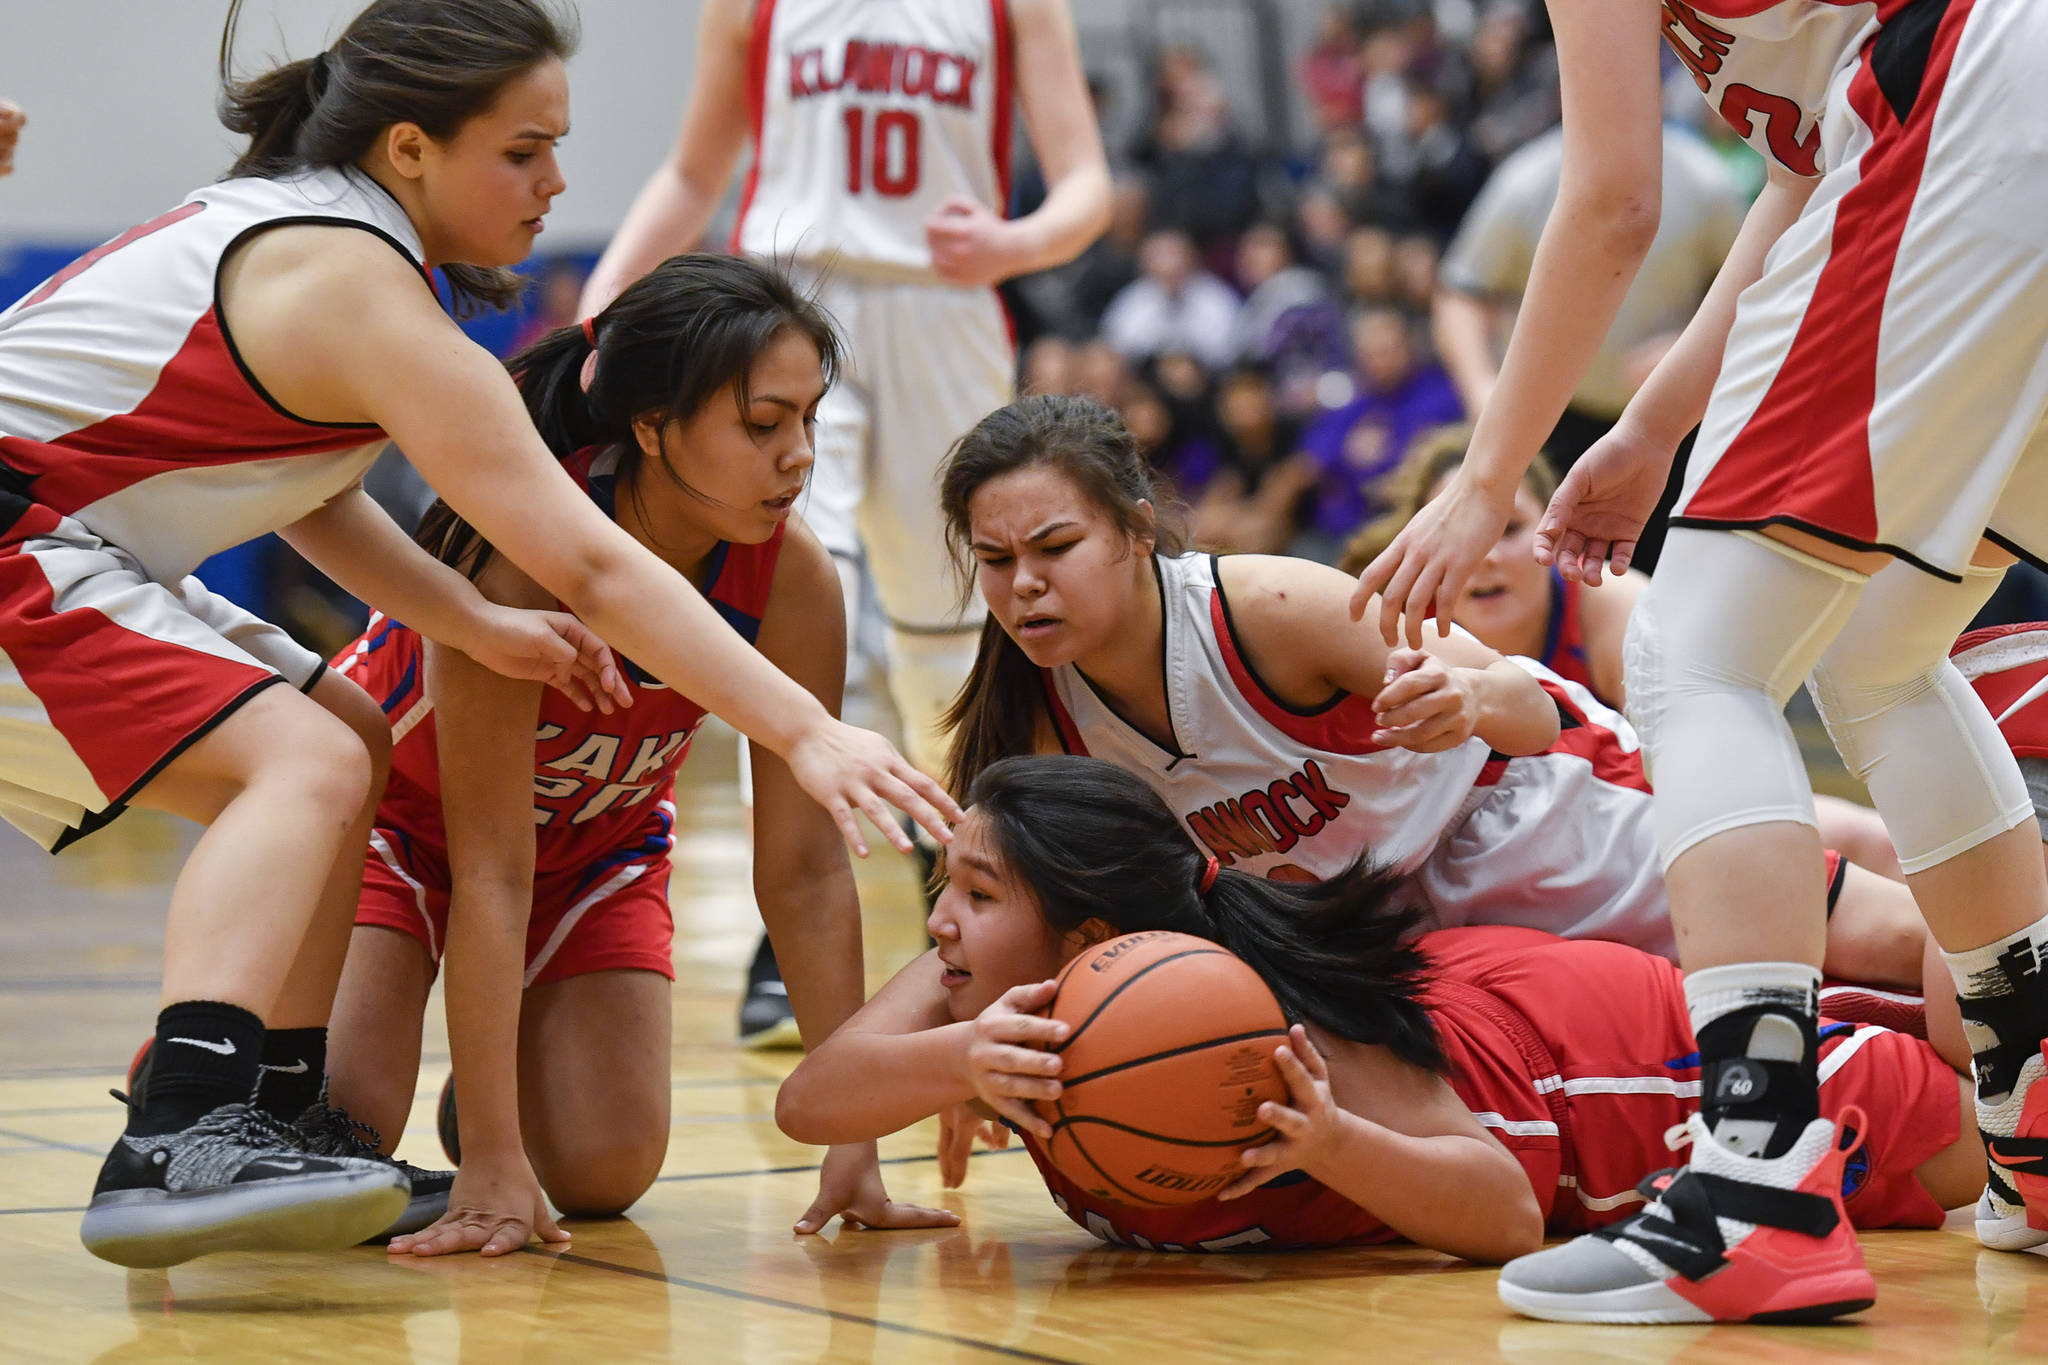 Kake’s Felicia Ross_Shaquanie, right, grabs the ball in a scrum with teammate Alexis Copsey and Klawock’s Valory Smith-Turpin, left, and Malory Smith-Turpin in the finals of the Region V 1A Basketball Championships at Thunder Mountain High School on Friday, March 1, 2019. Klawock won 47-46. (Michael Penn | Juneau Empire)